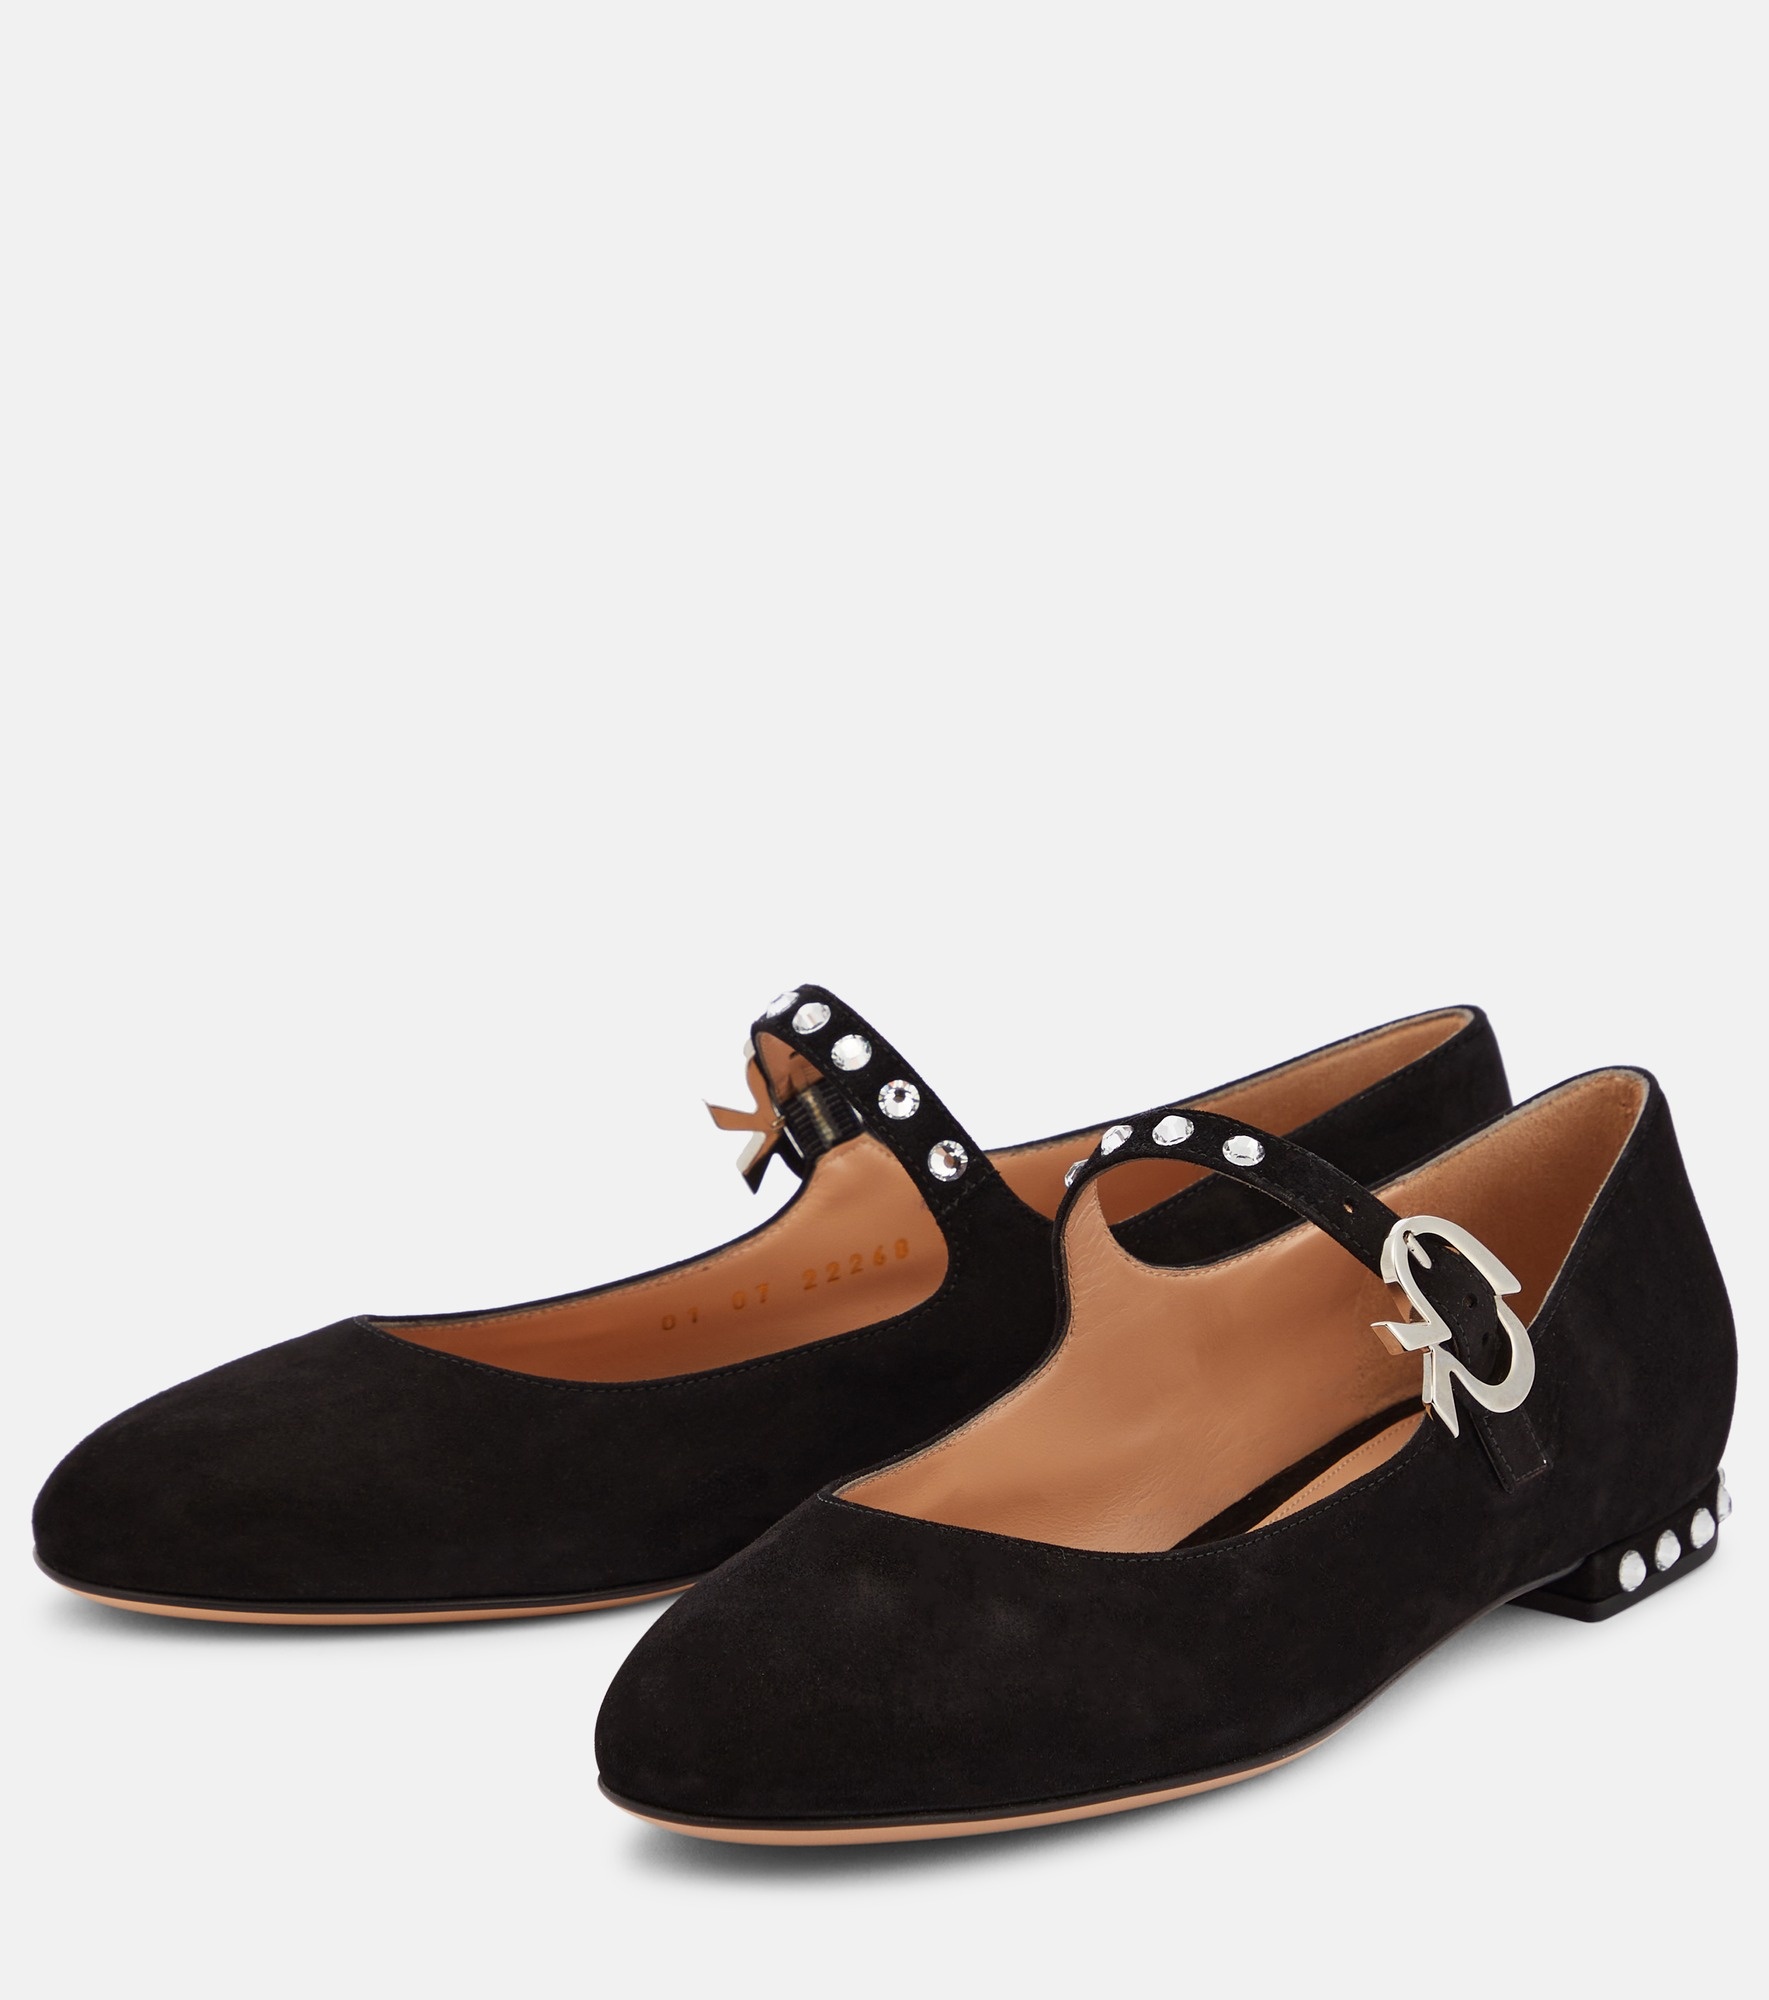 Crystal Mary Ribbon suede ballet flats - 5